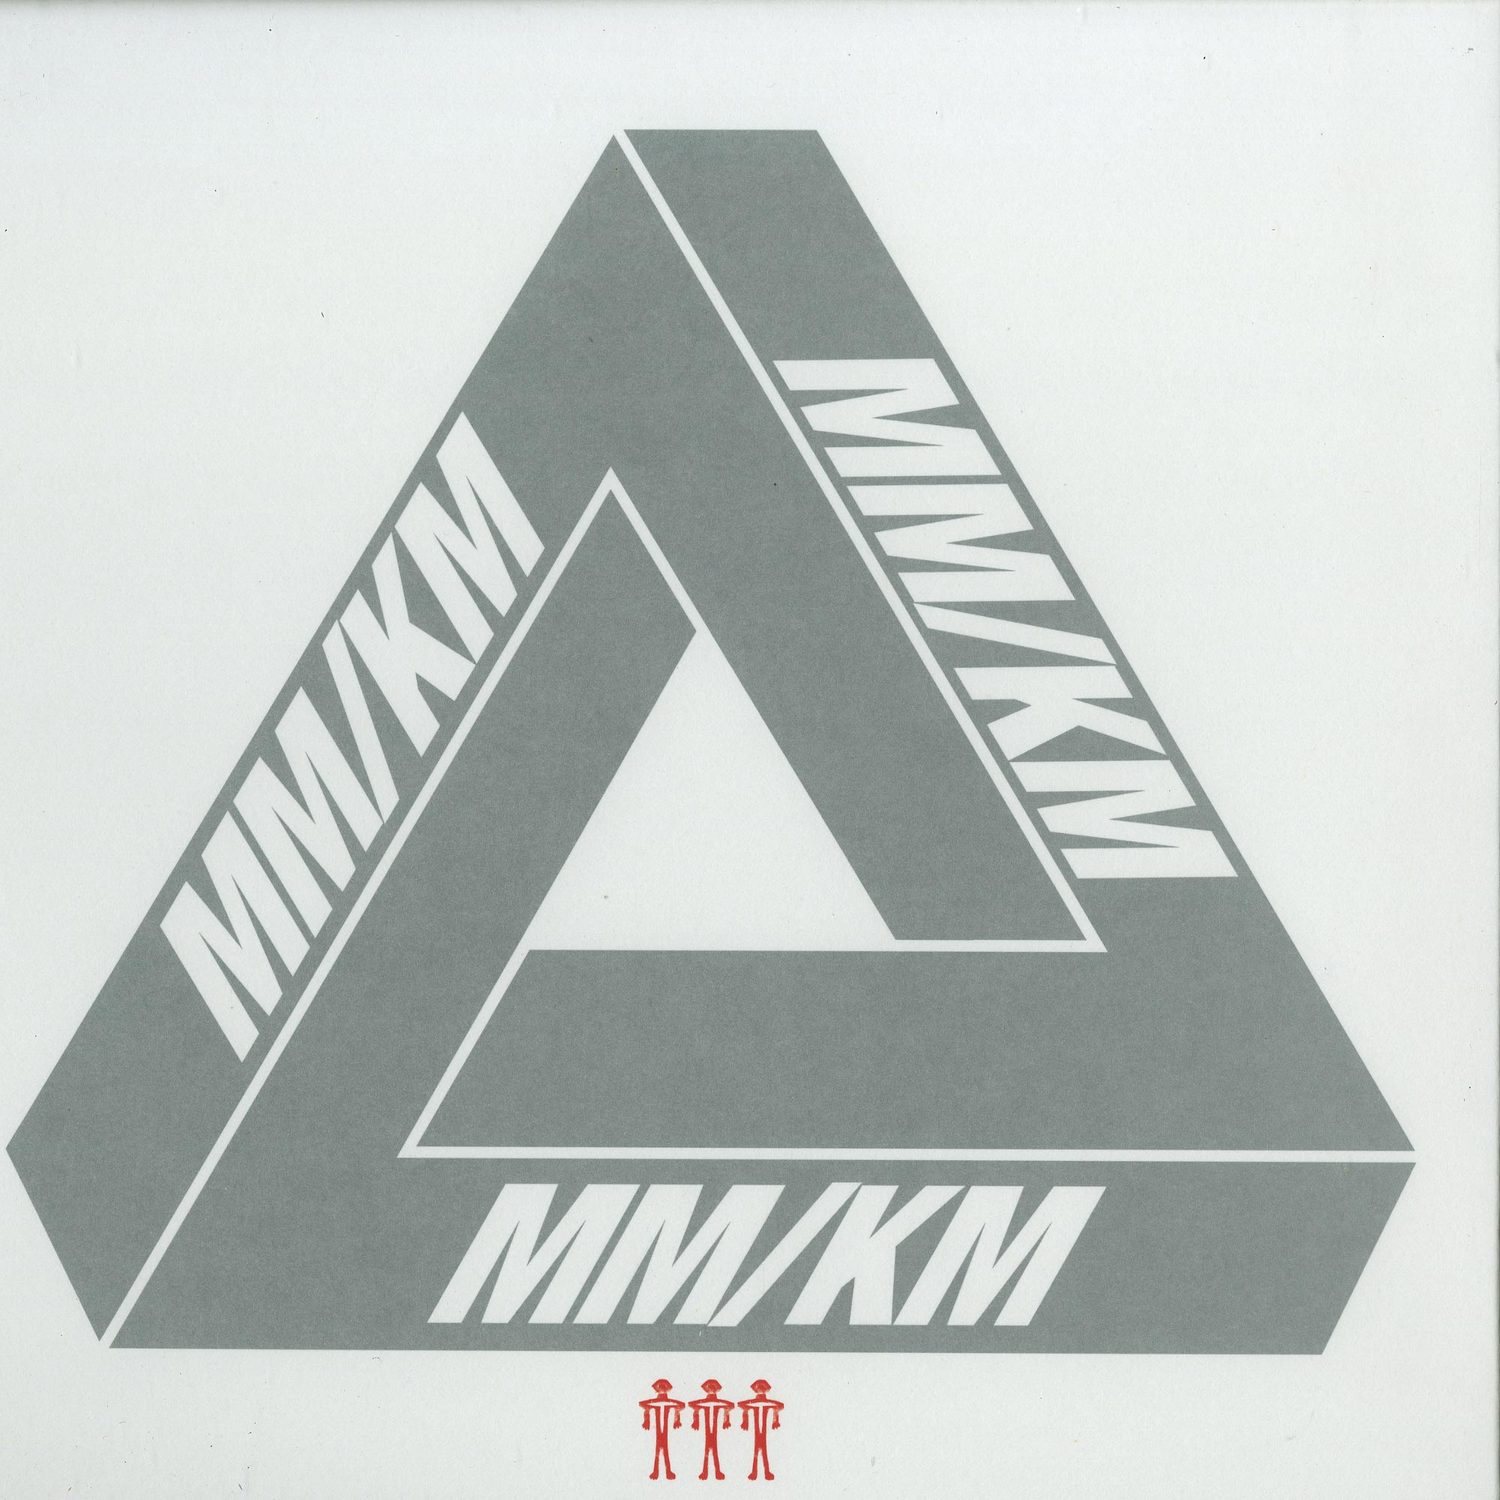 MM / KM - HAVE YOU SEEN THEM EP